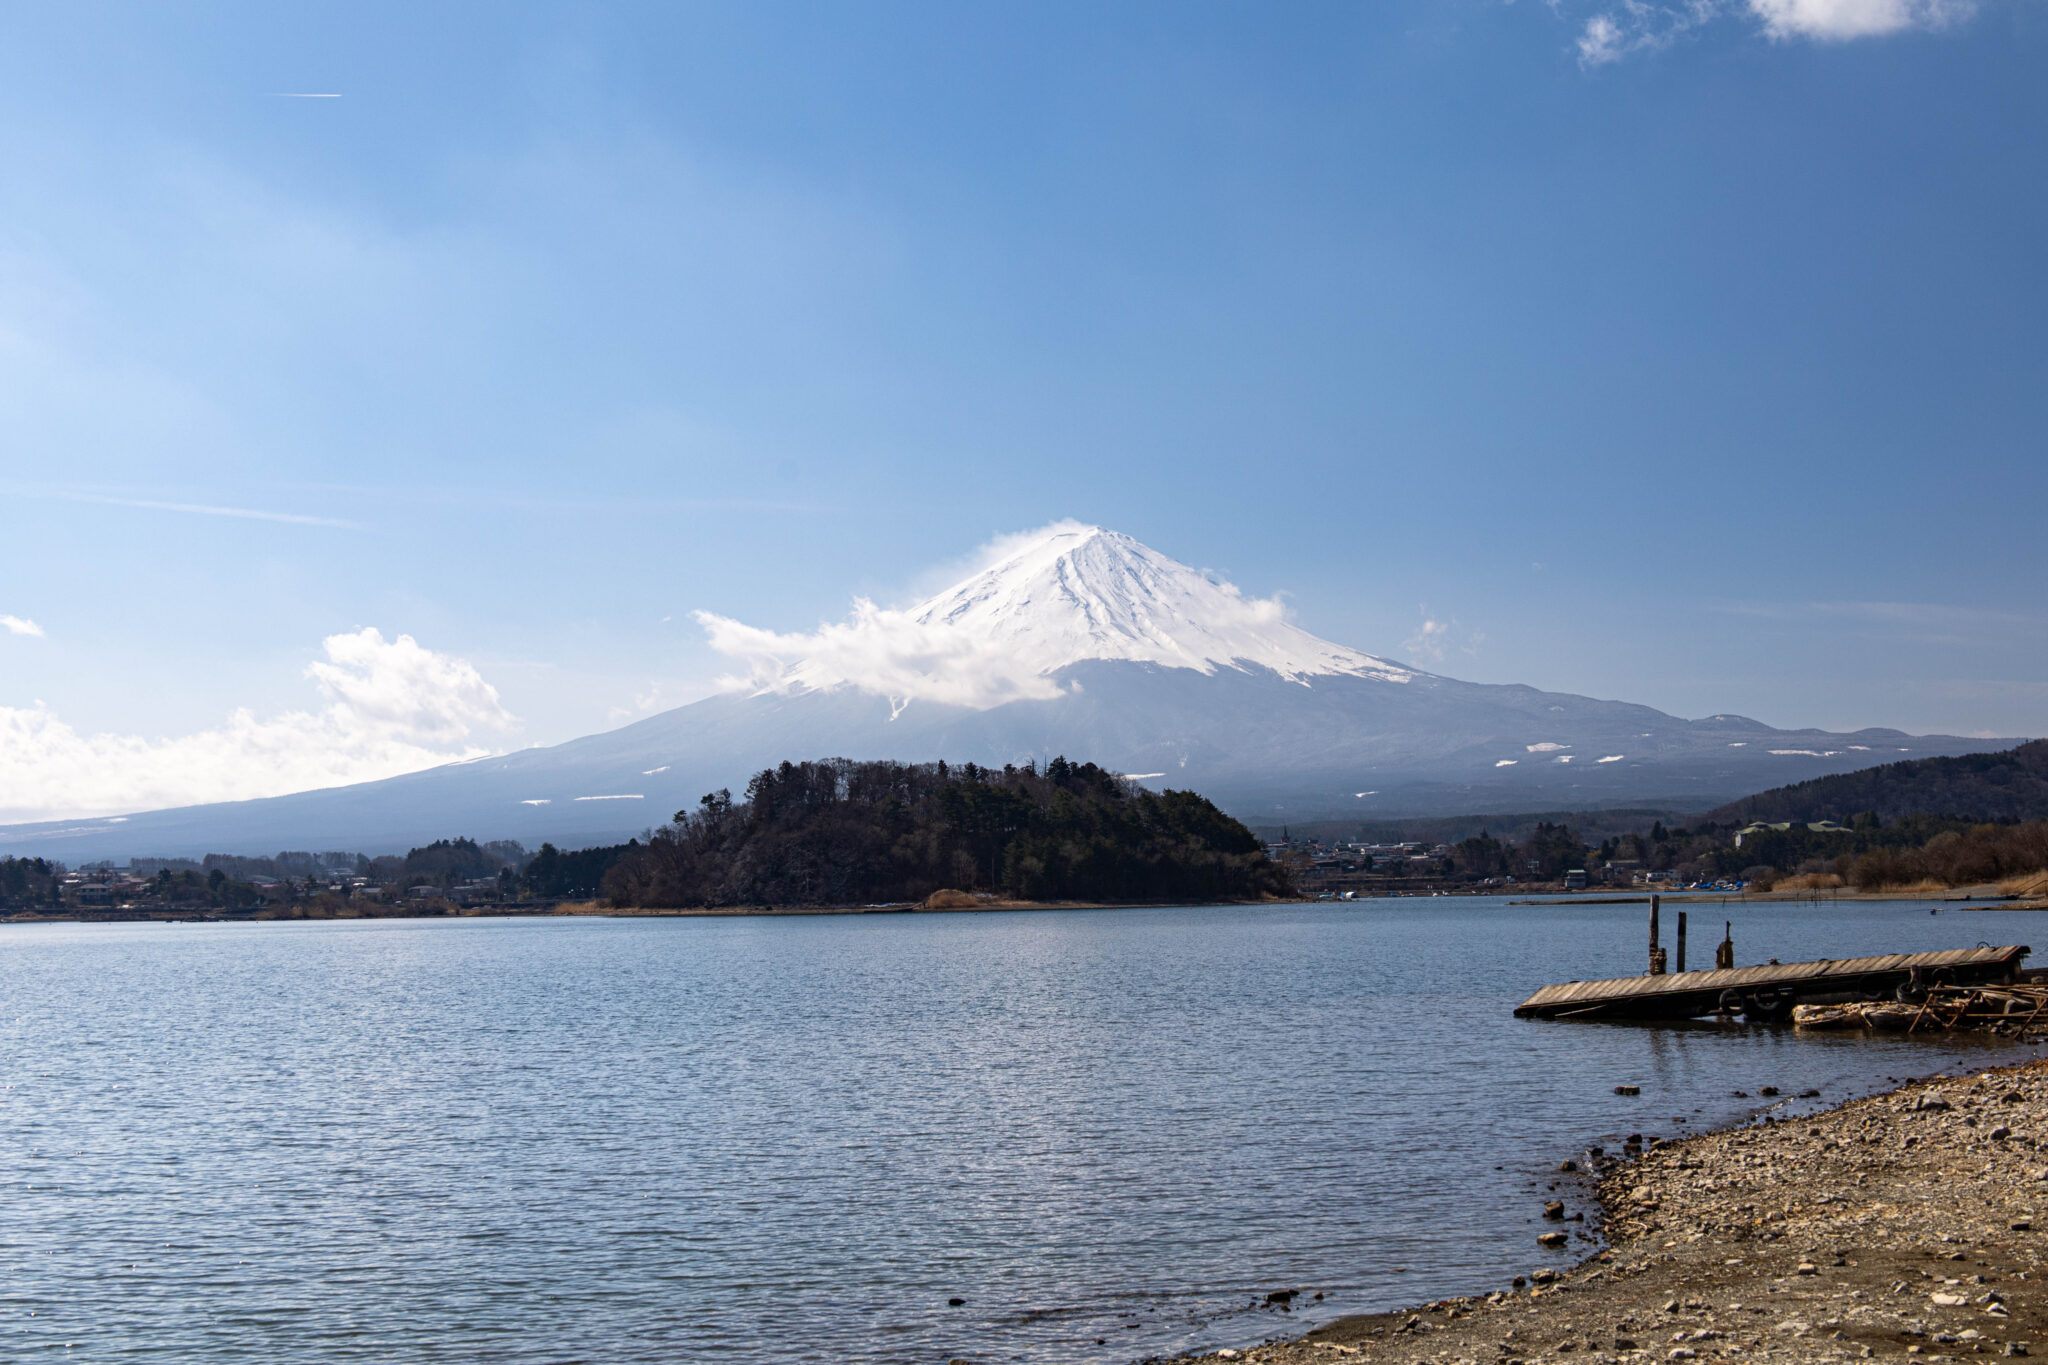 Mount Fuji from Lake Kawaguchiko. This full two week itinerary for first-timers to Japan has everything for planning your perfect vacation including the best day trips.